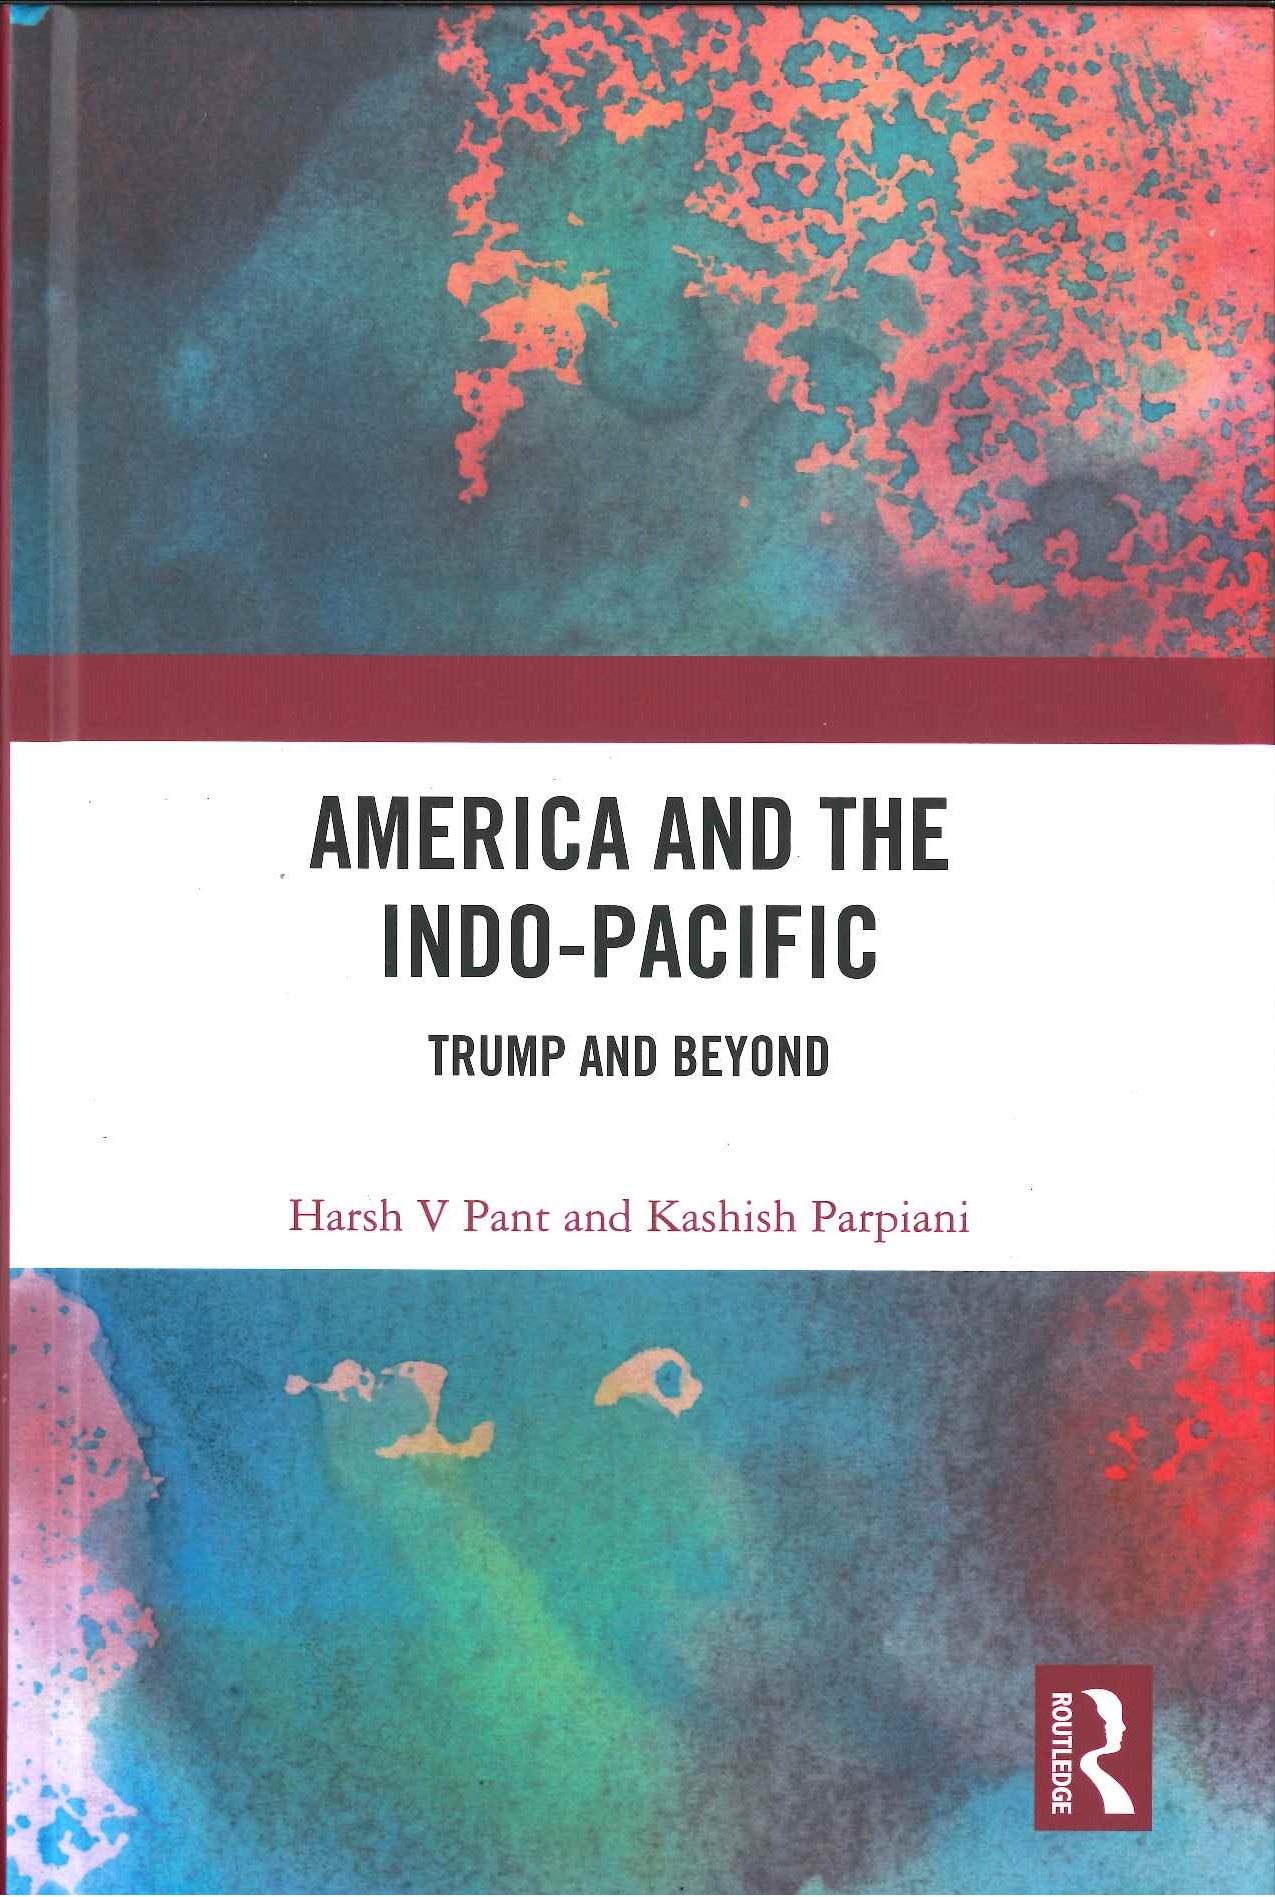 America and the Indo-Pacific:Trump and beyond